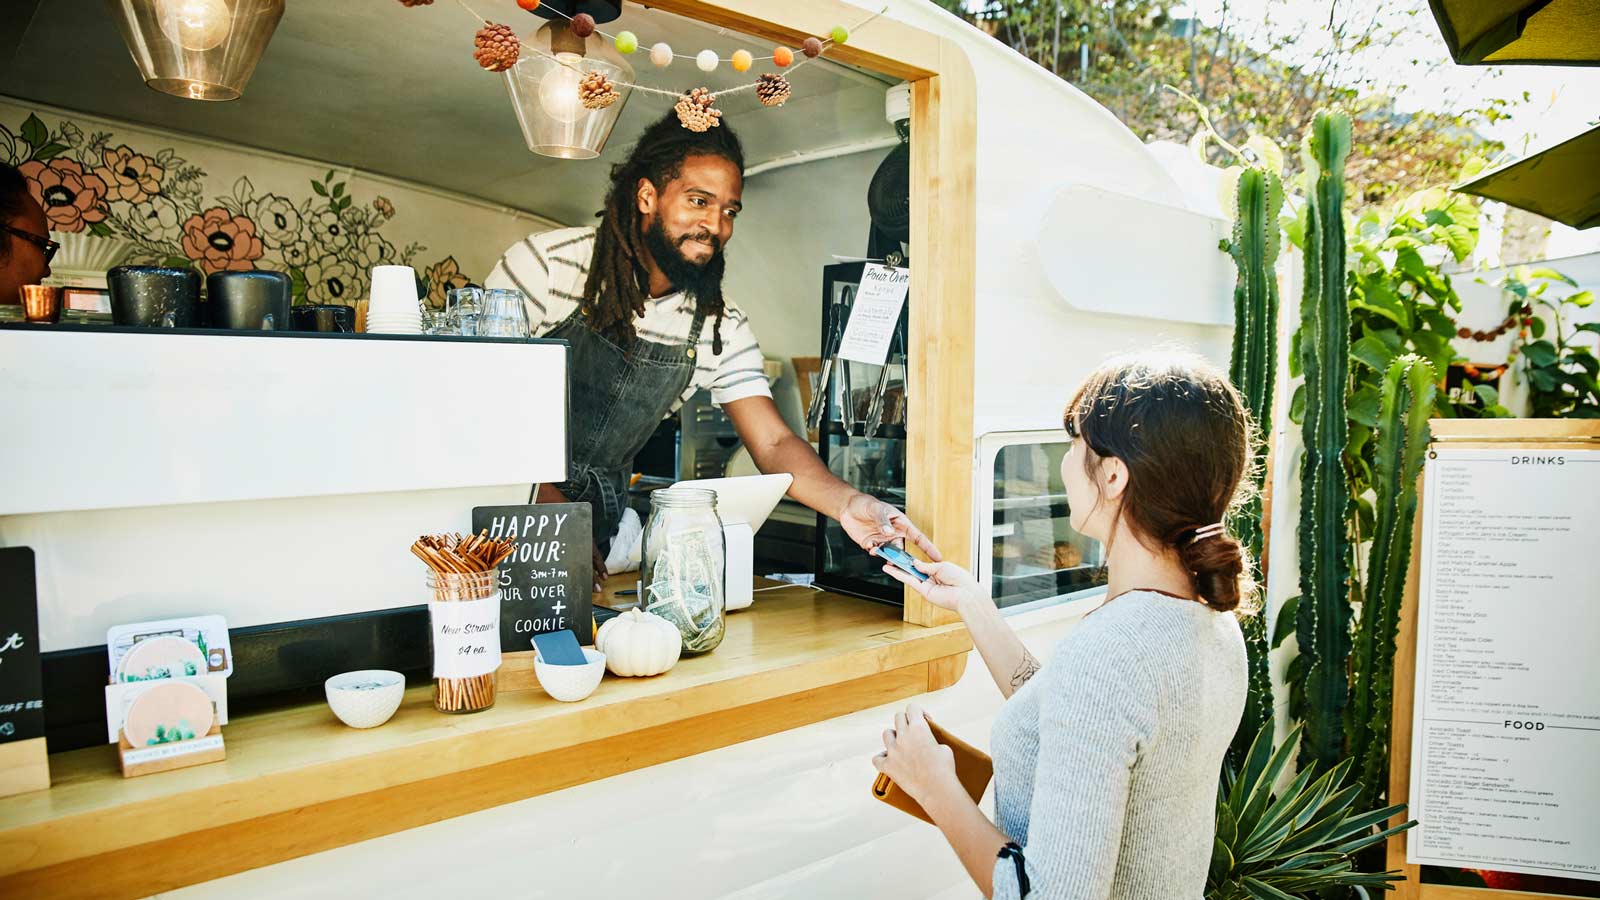 Food truck merchant accepting credit card payment.